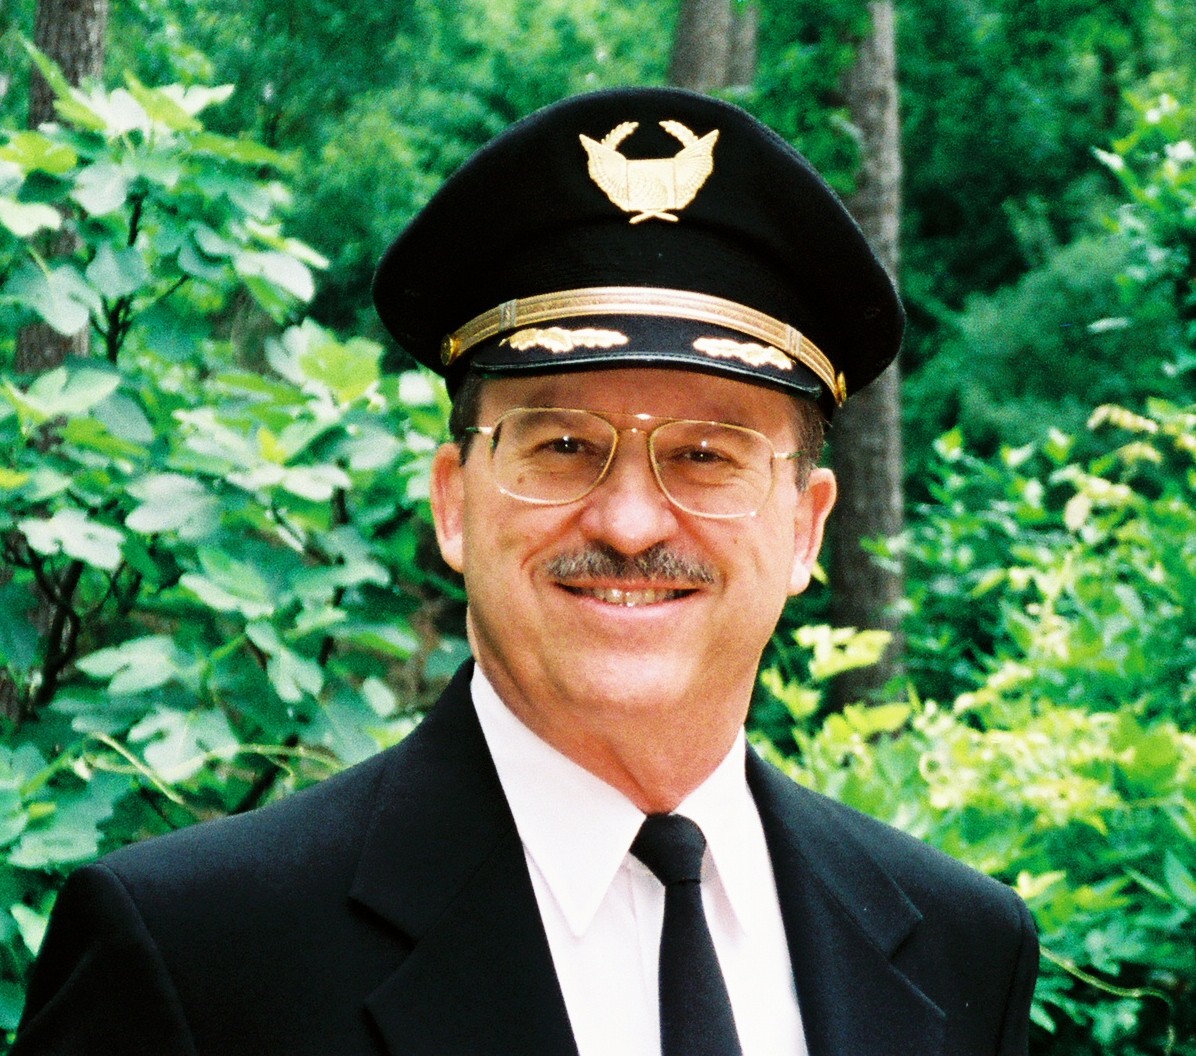 1999 in Continental Airline Uniform